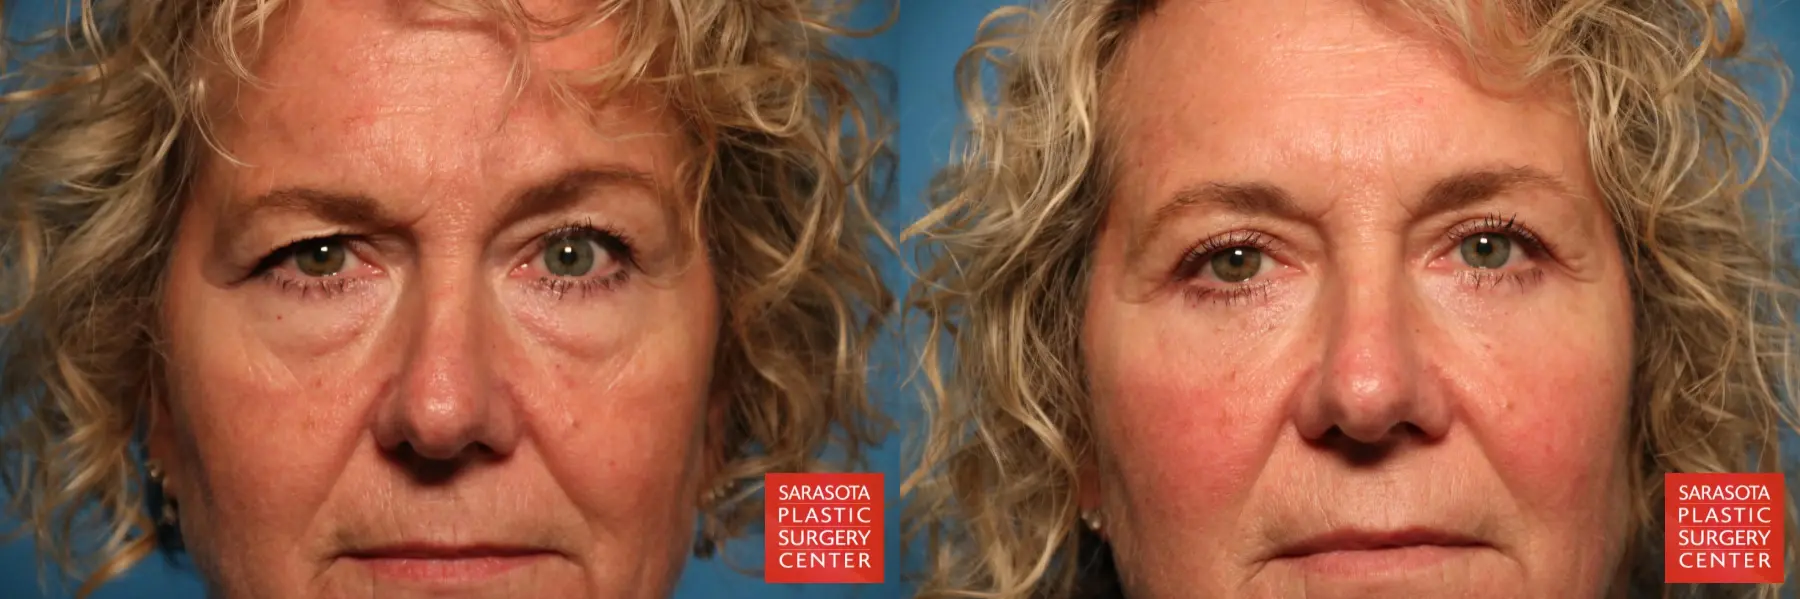 Eyelid Surgery: Patient 4 - Before and After  